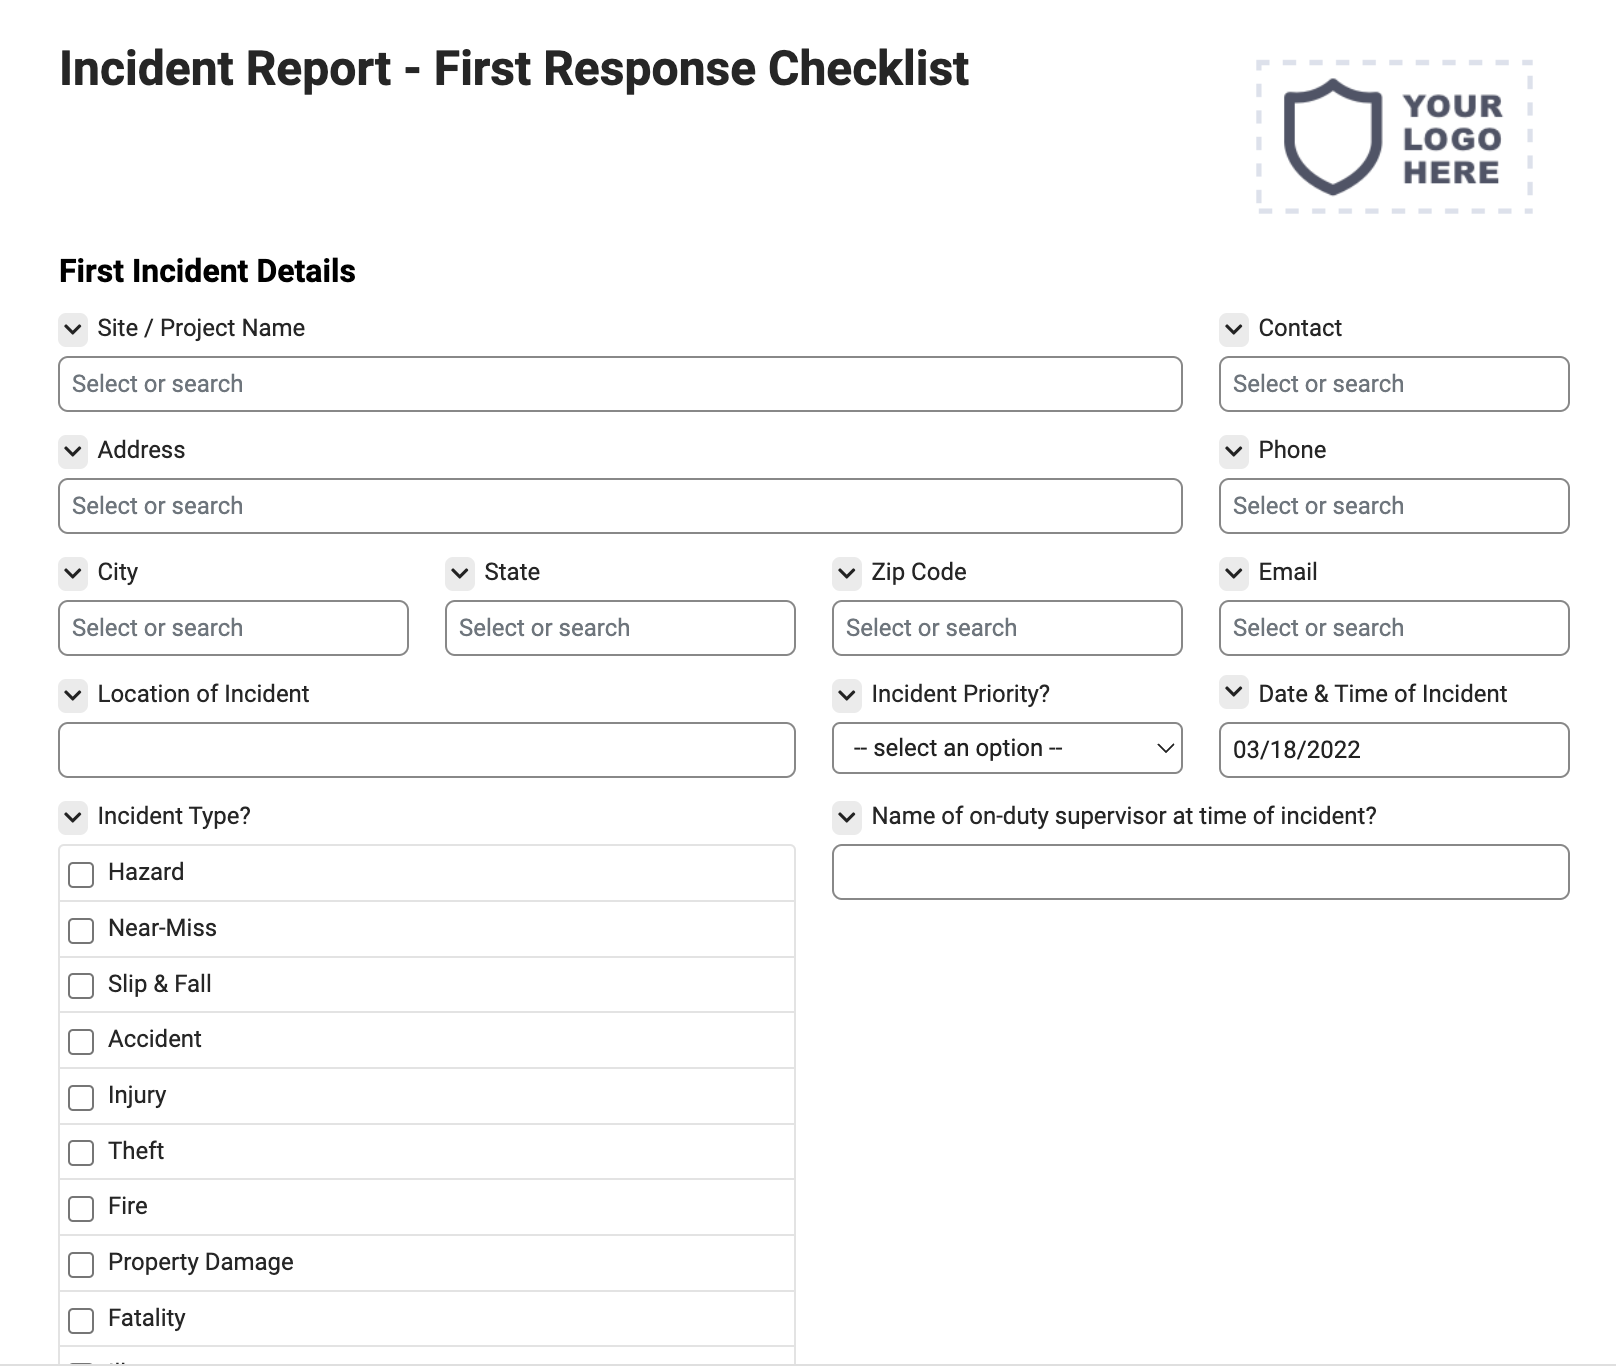 Incident Report - First Response Checklist